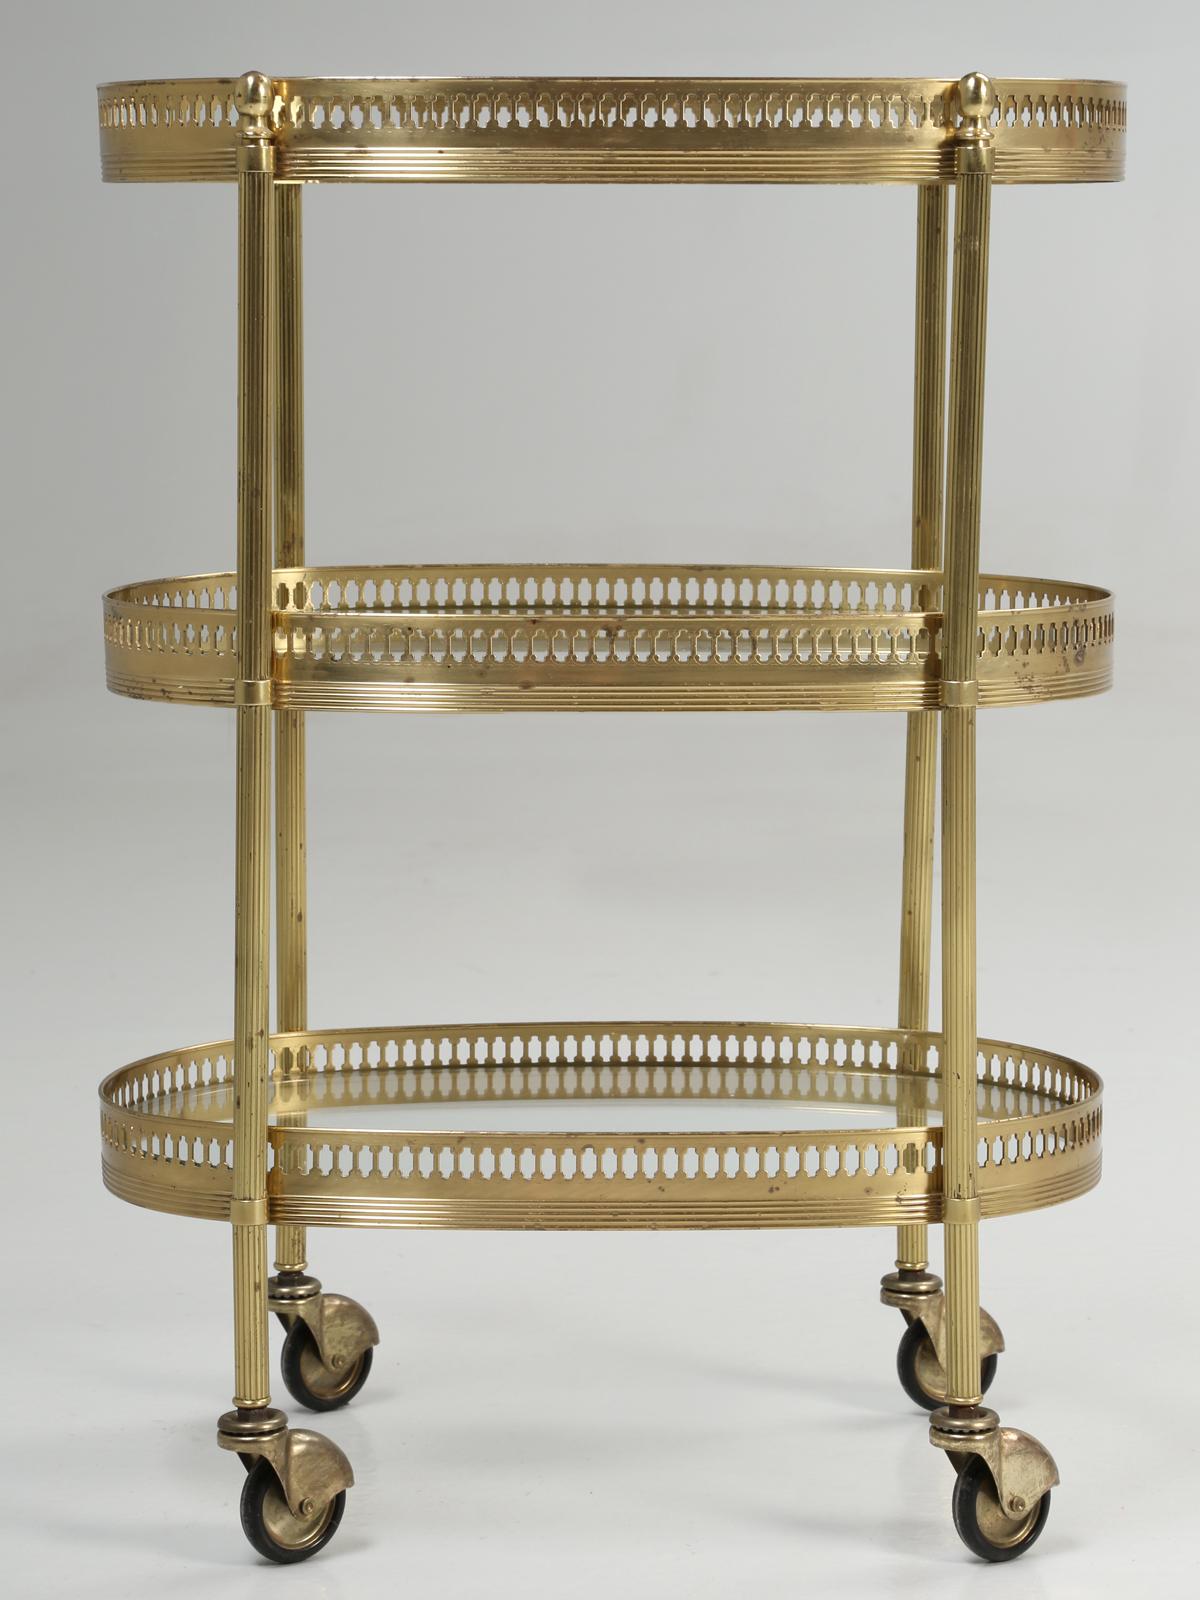 Vintage French très petite brass bar cart or tea cart in its original finish. Please note some minor imperfections or pitting in the brass plating.